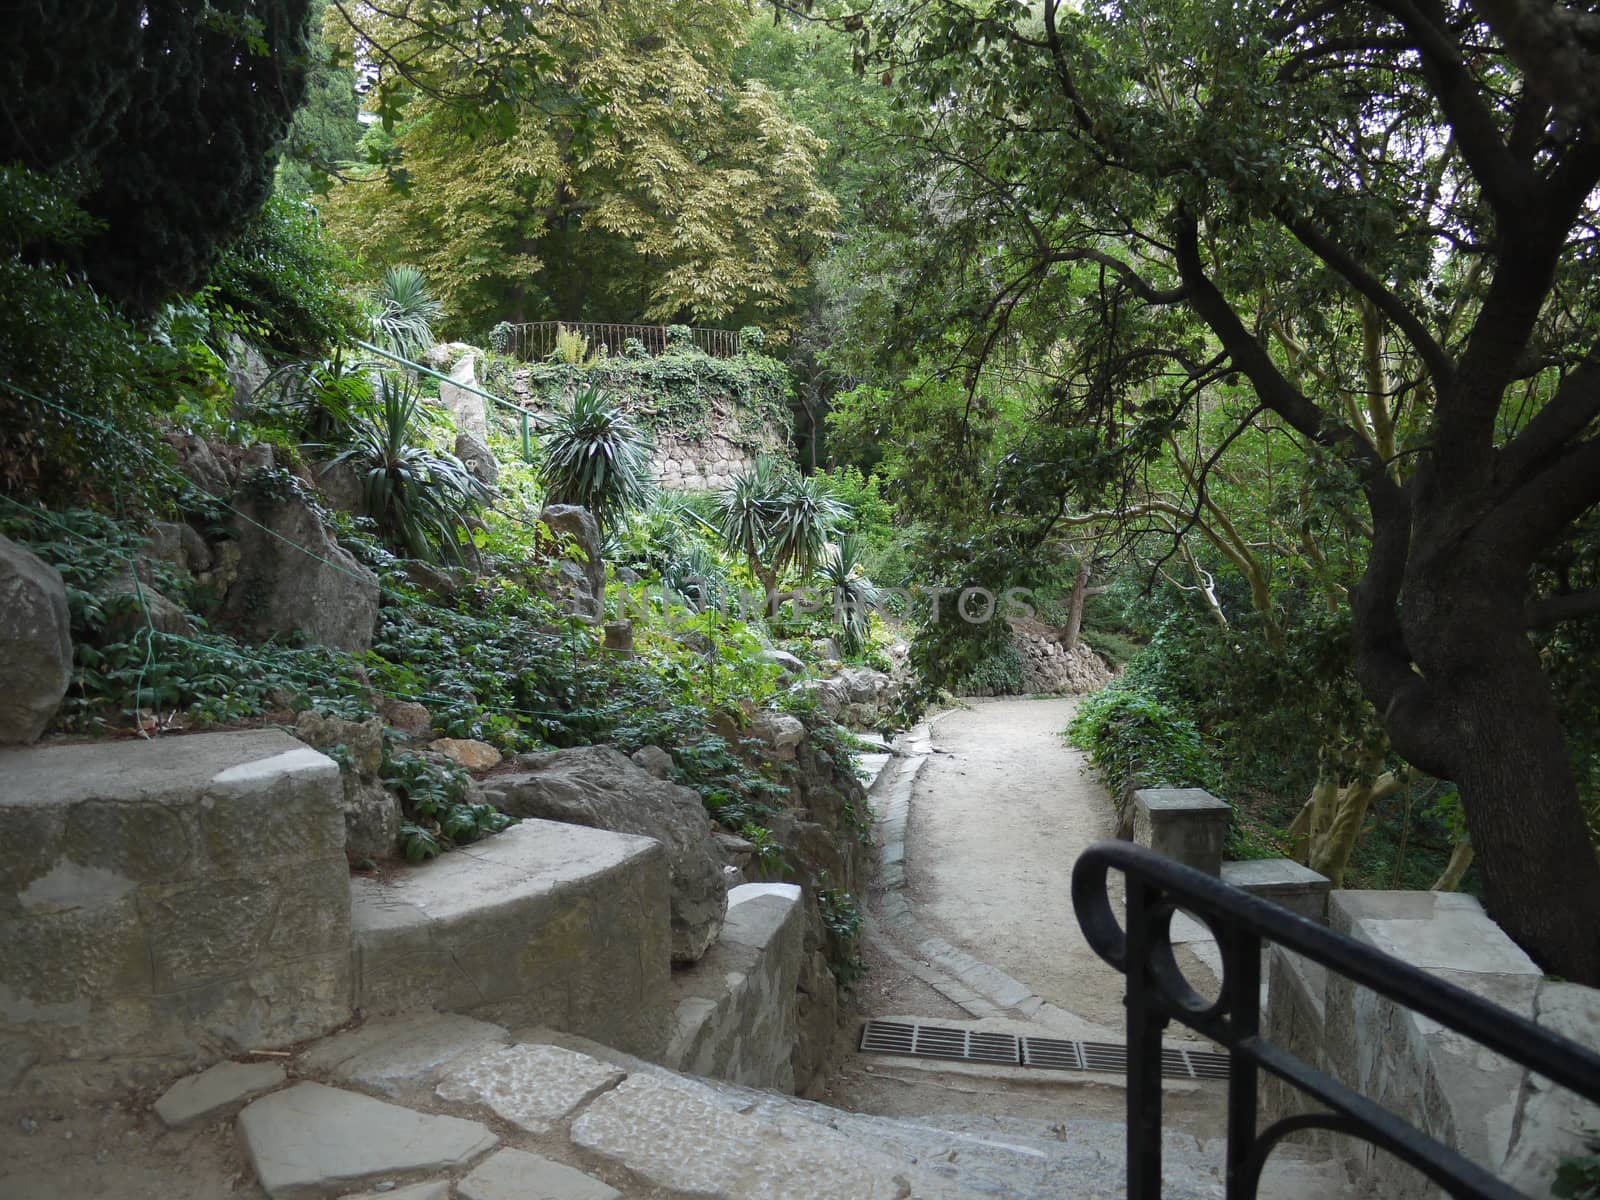 Park with lush greenery of flower beds and trees. With a large variety of forms of stones amongst the plants and a pathway running amidst all this beauty.